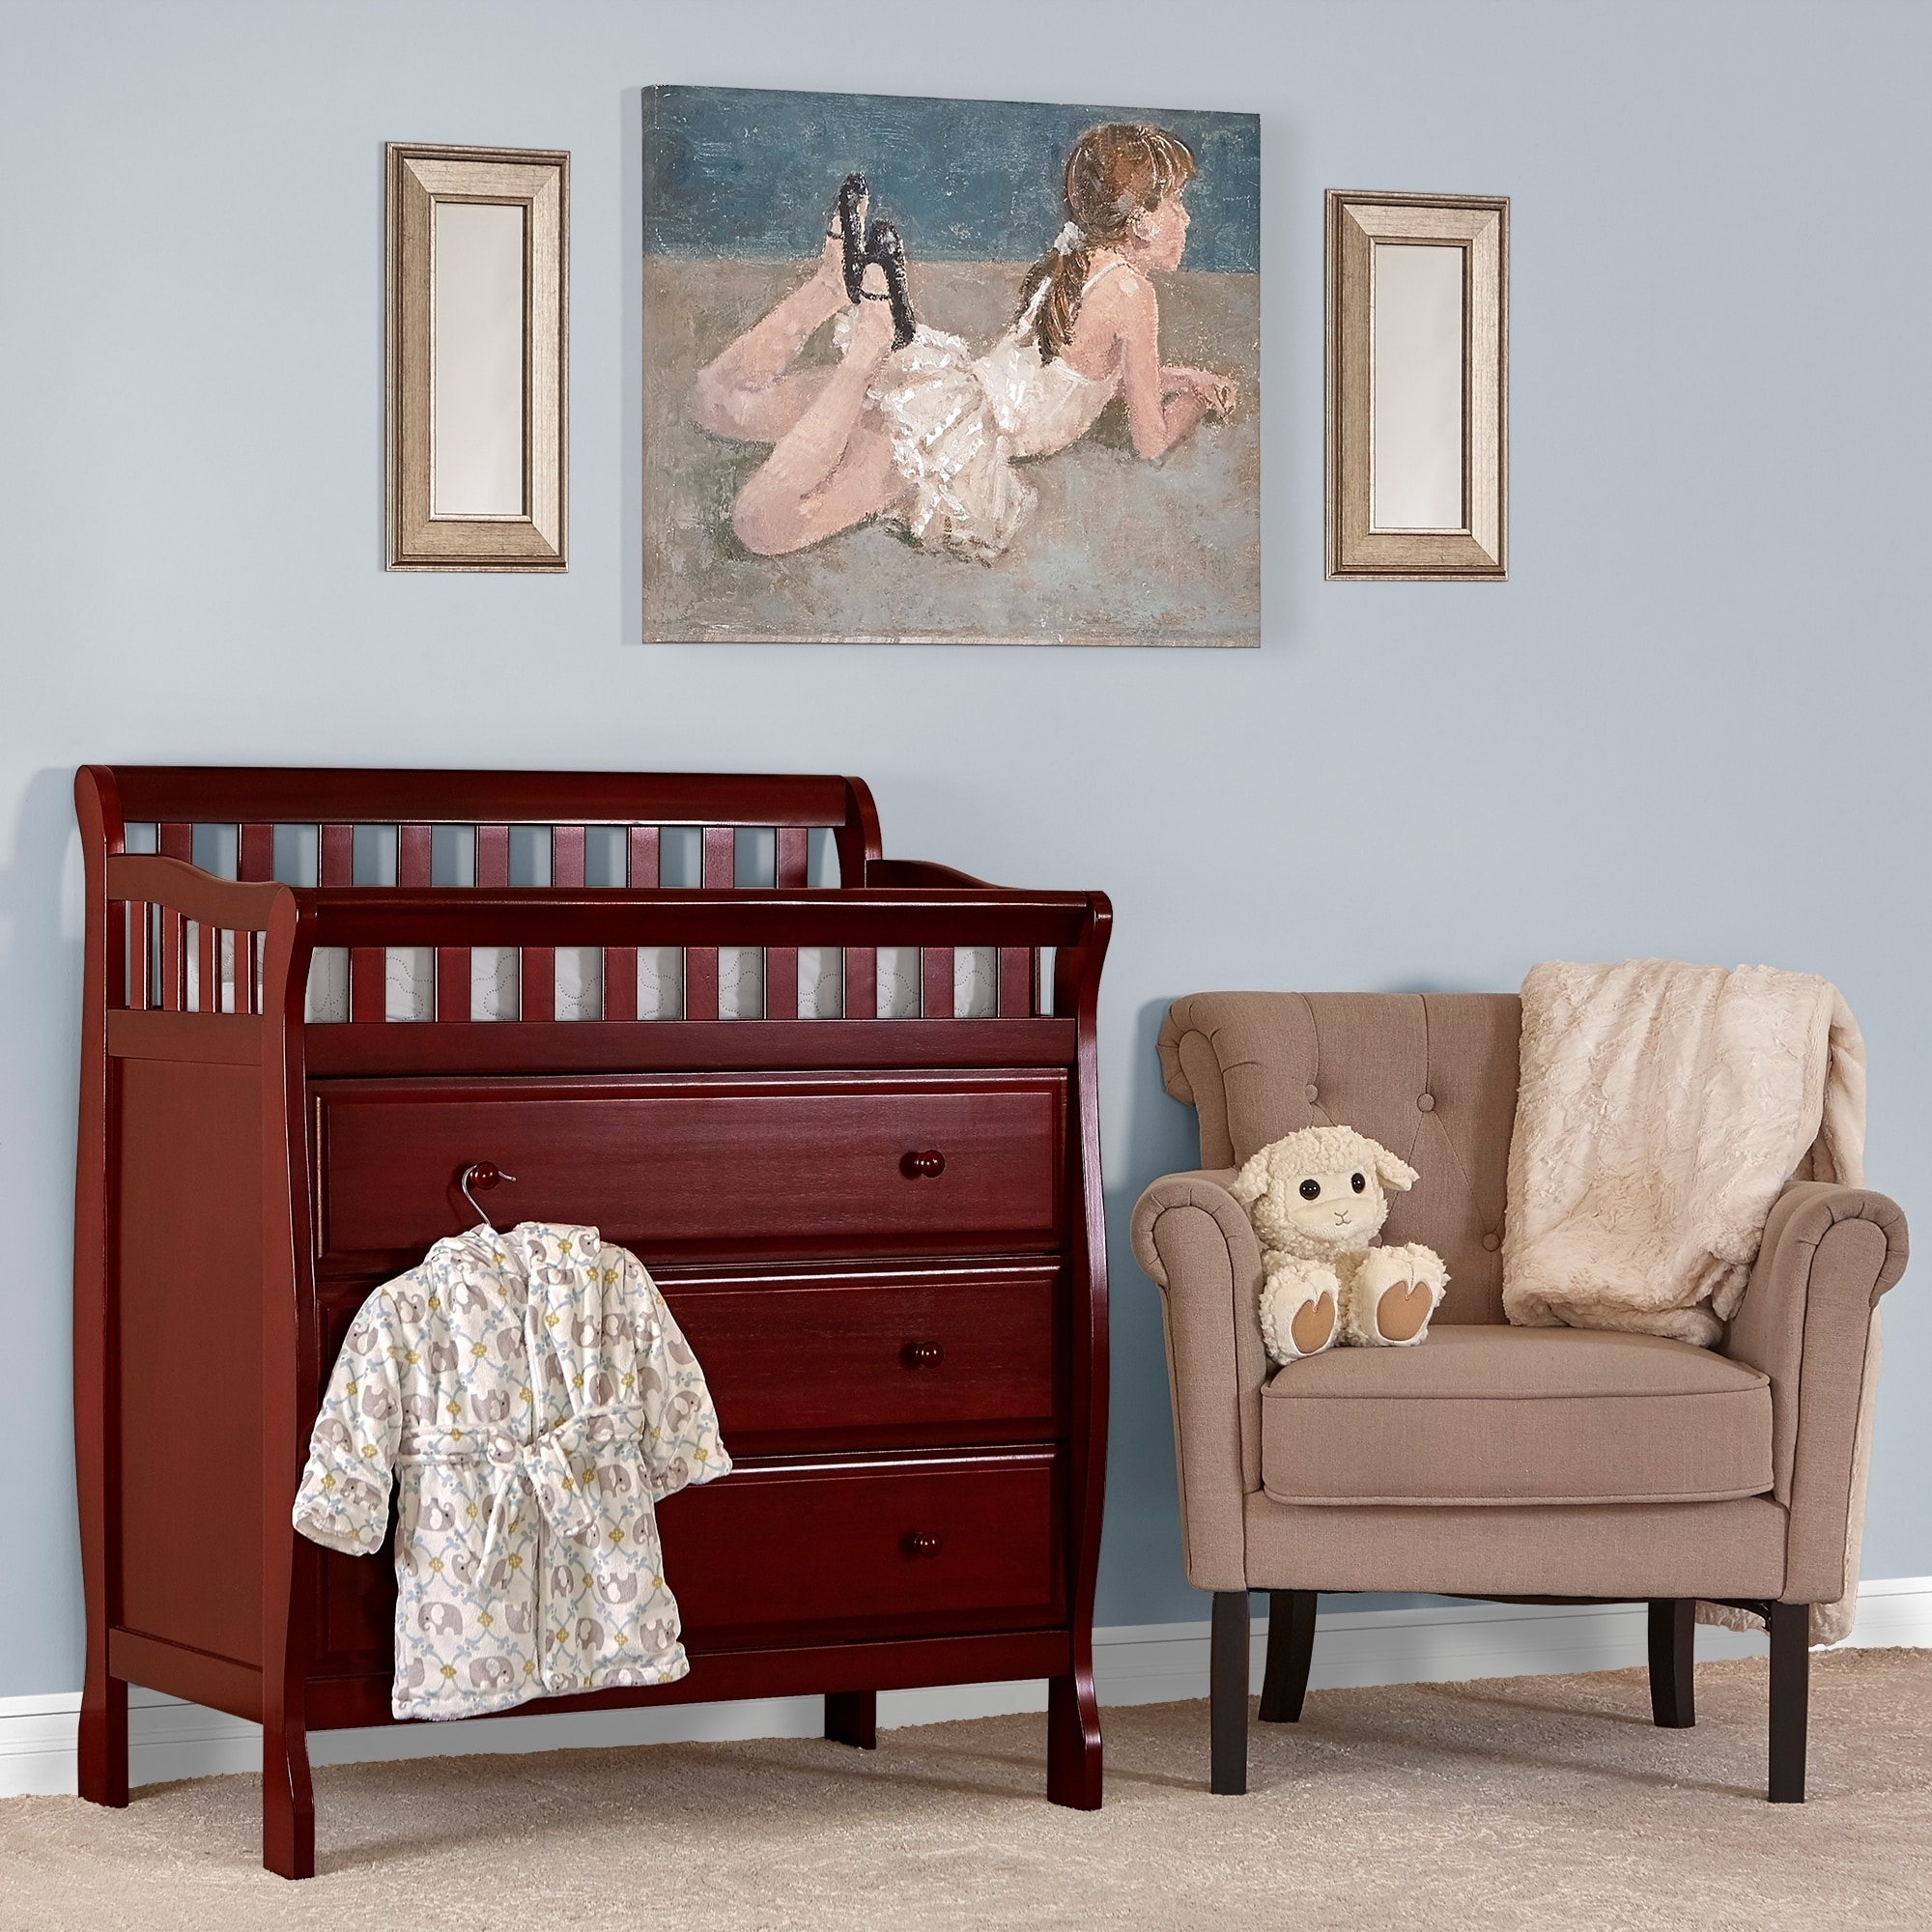 cherry changing table dresser